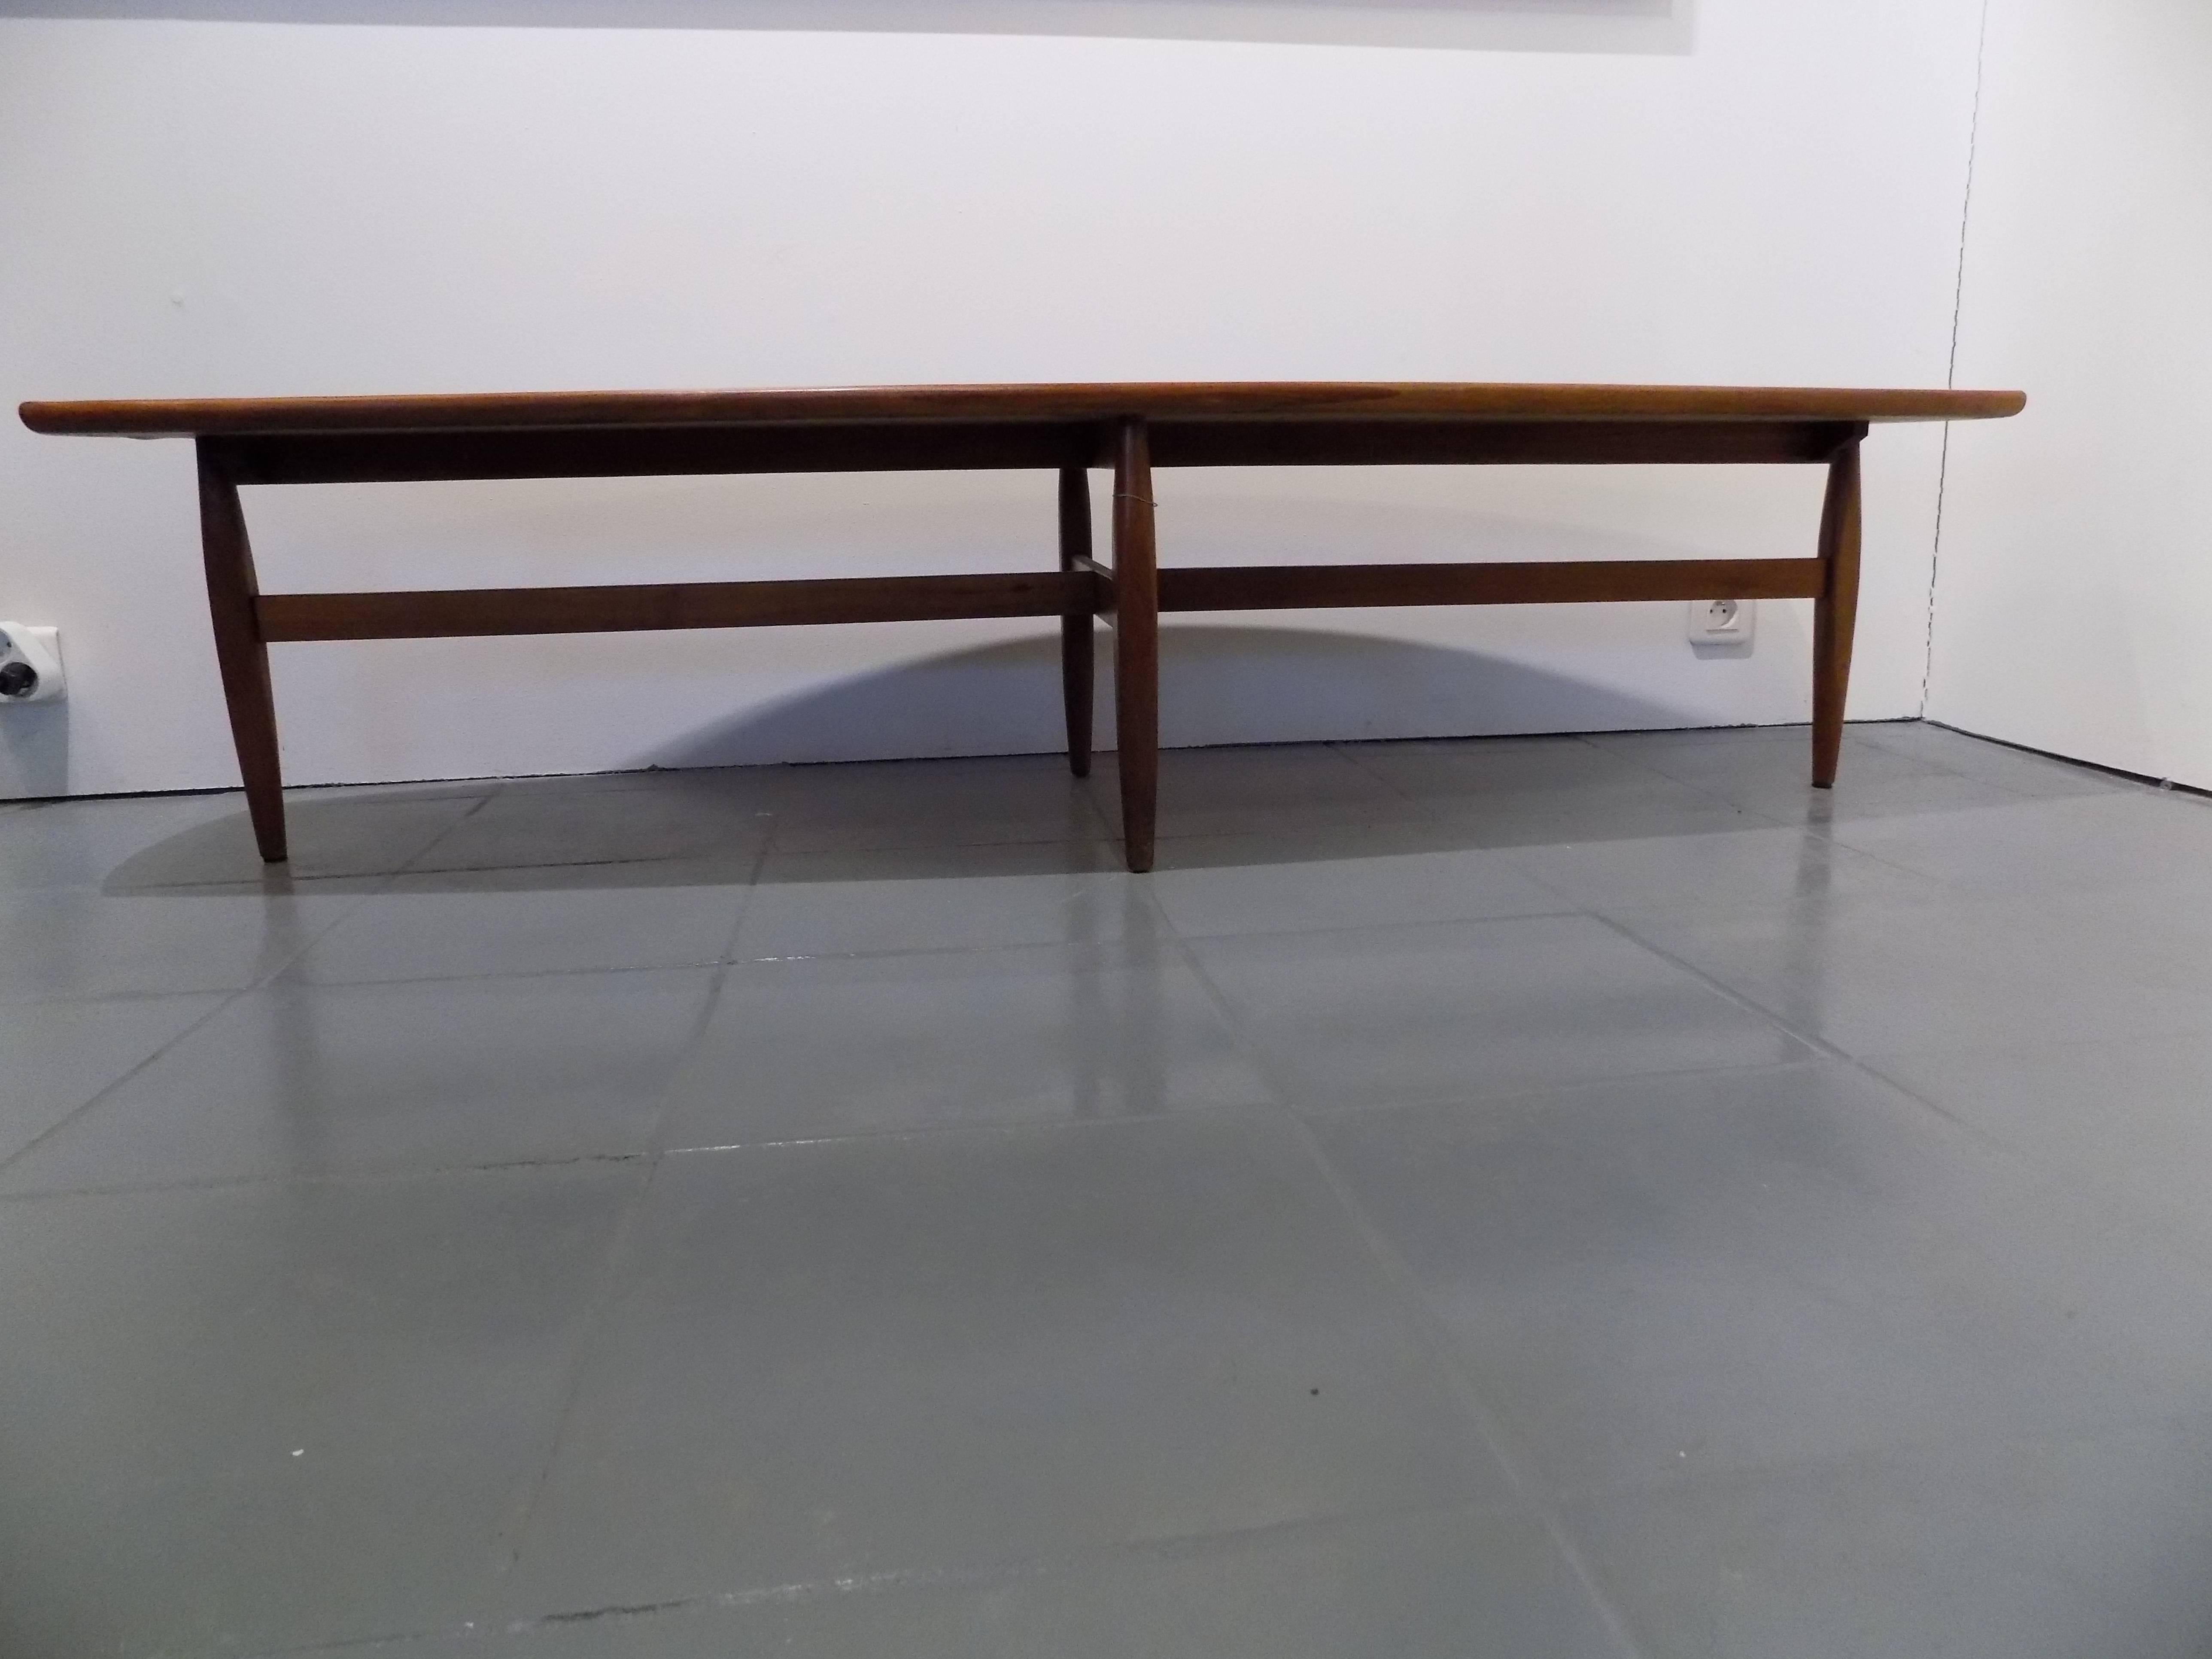 Coffee Table “Surfing” by Drexel In Excellent Condition For Sale In Megeve, FR